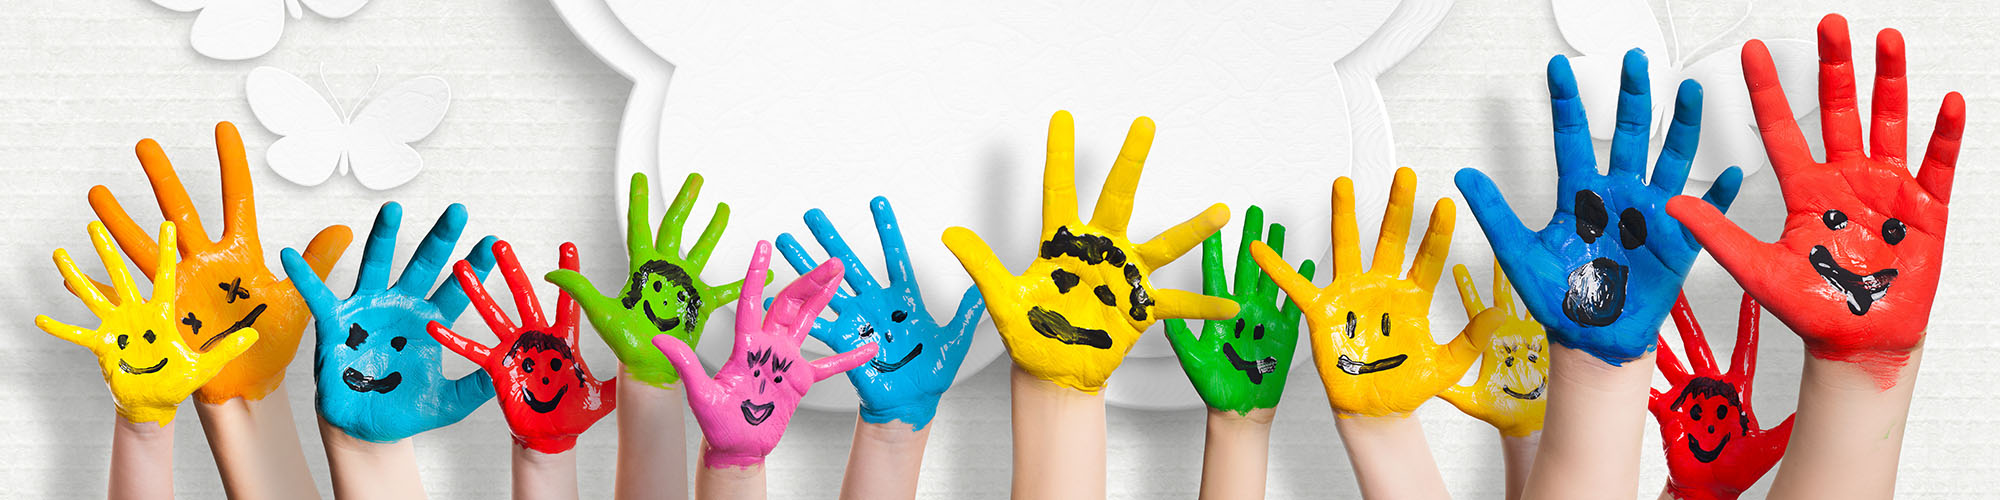 Kids Painted Hands